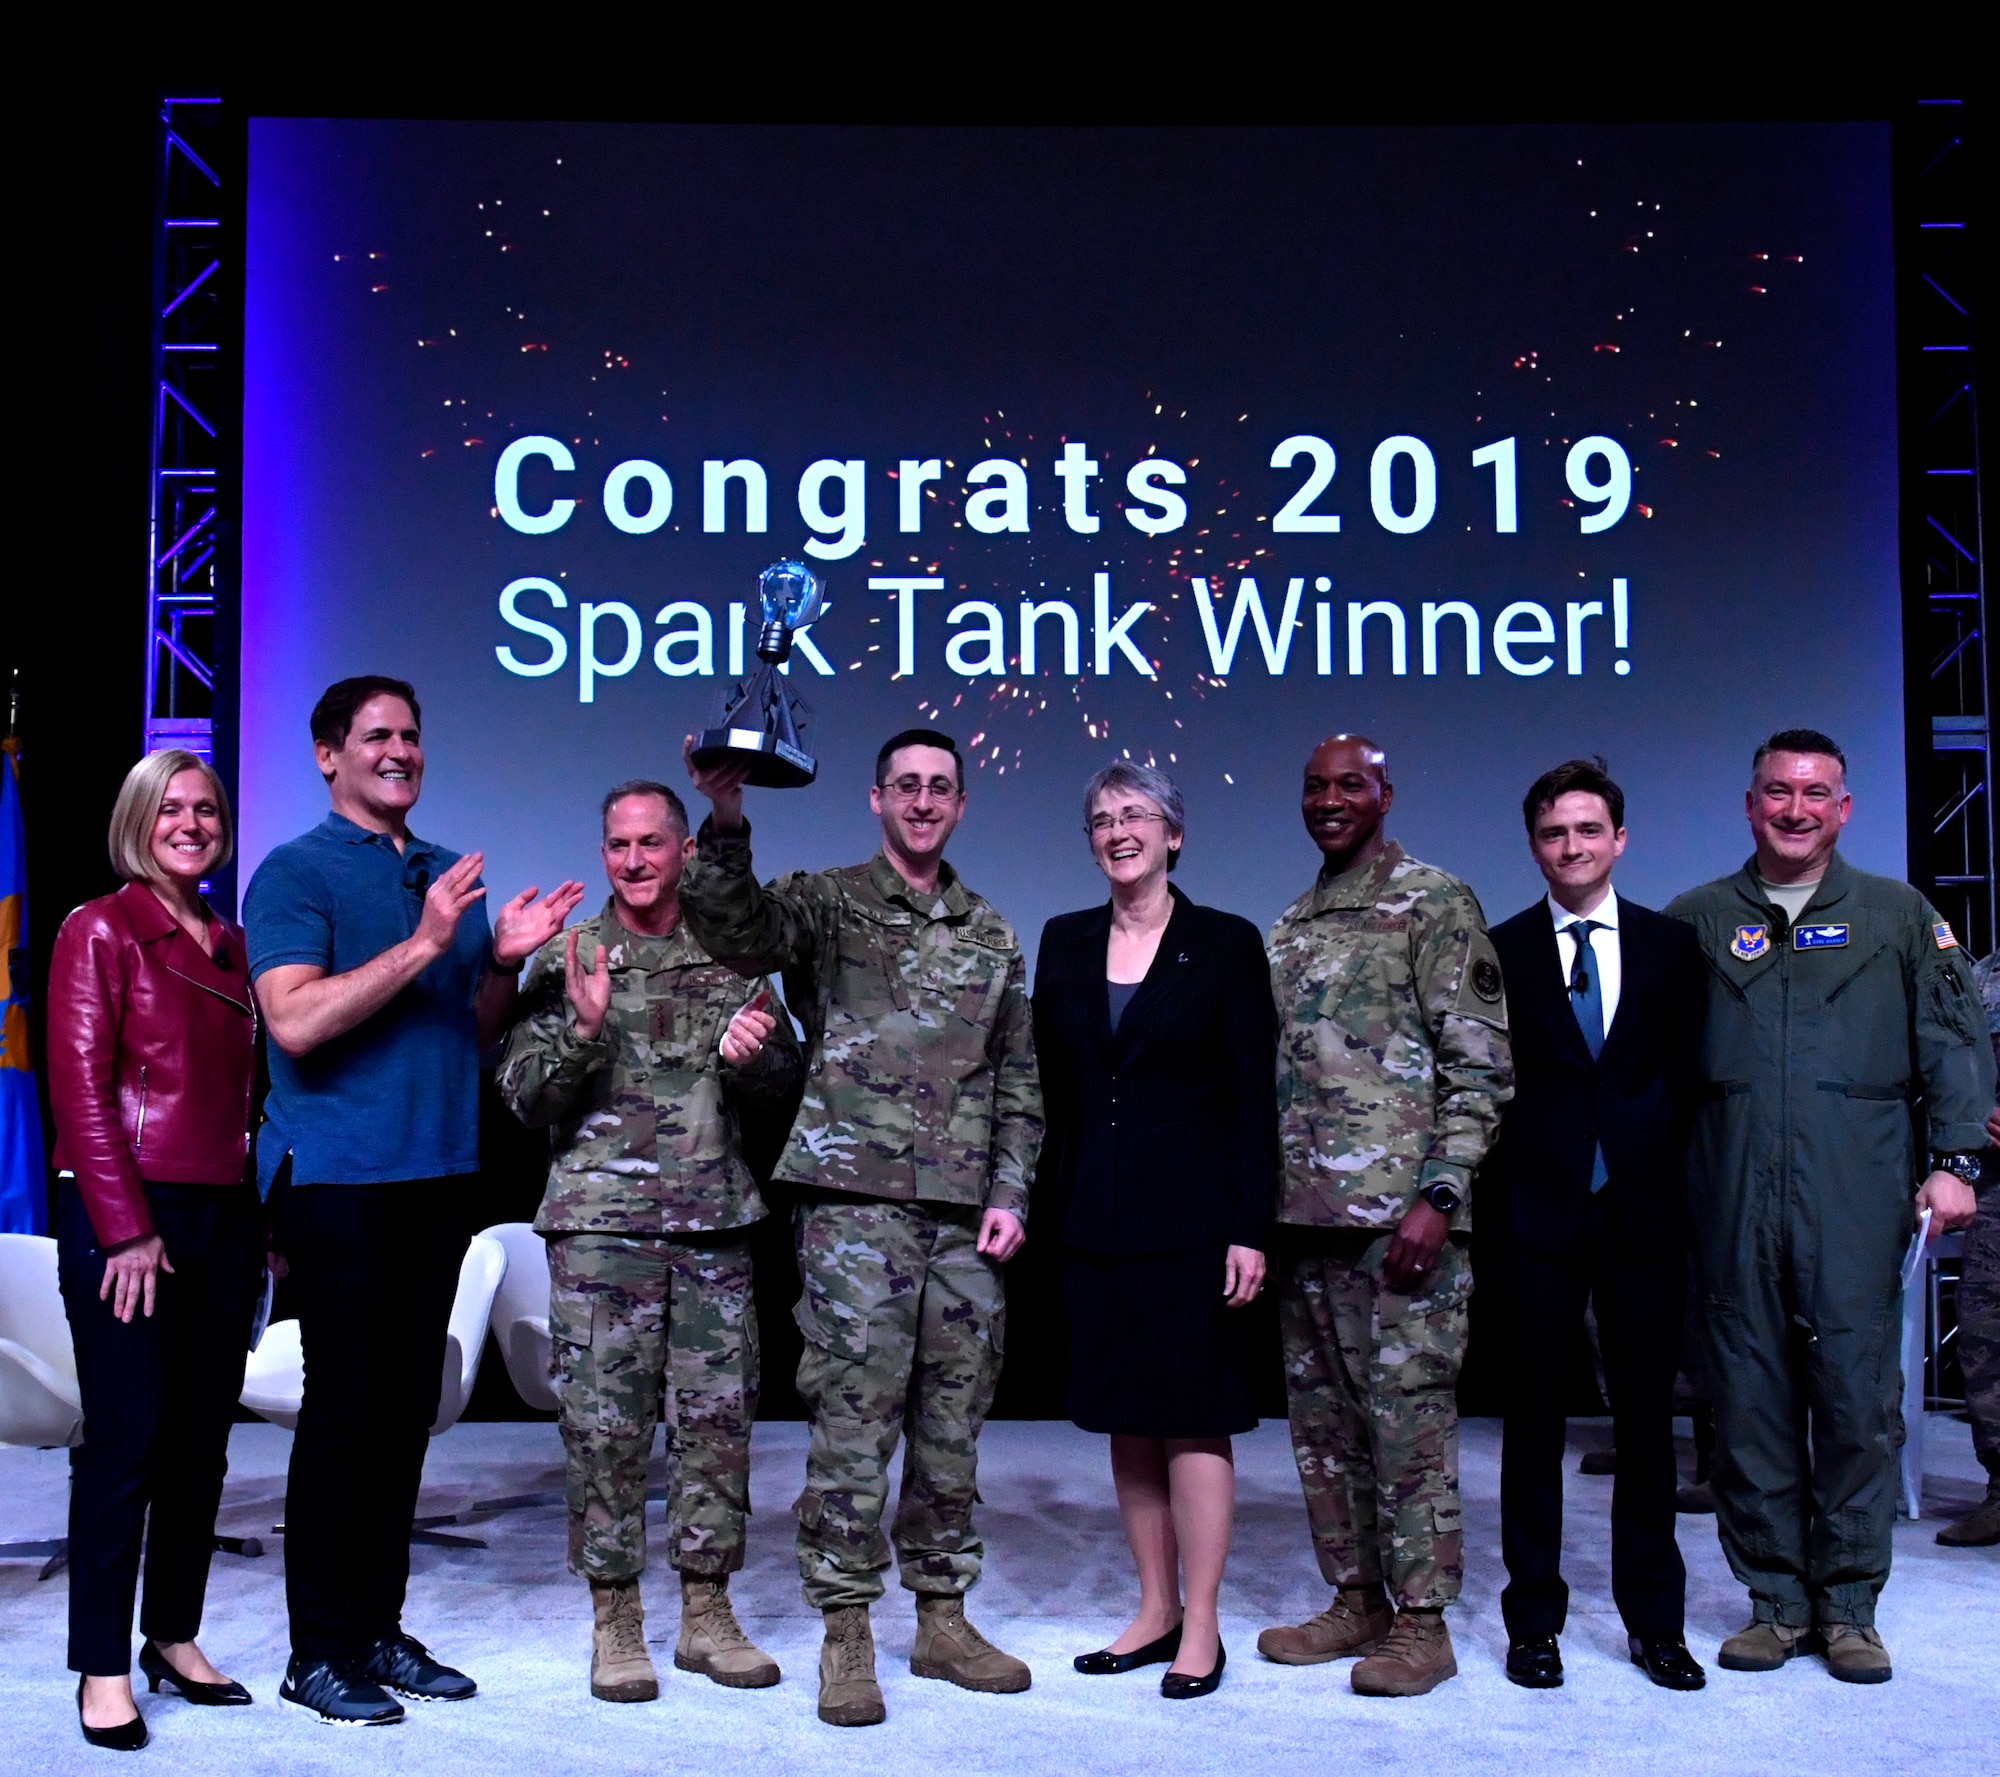 The 2019 Air Force Spark Tank competition judges Secretary of the Air Force Heather Wilson, Air Force Chief of Staff Gen. David L. Goldfein and Chief Master Sgt. of the Air Force Kaleth O. Wright, Mark Cuban and George Steinbrener IV pose for a group photo with the Spark Tank winner during the Air Force Association’s Air Warfare Symposium in Orlando, Florida, Feb. 28, 2019. Spark Tank is a chance to celebrate Air Force risk-takers, idea makers and entrepreneurs who refuse to accept the status quo and have determined their own fate by developing solutions that make it easier for the Air Force to bring the very best to the fight. (U.S. Air Force photo by Wayne Clark)